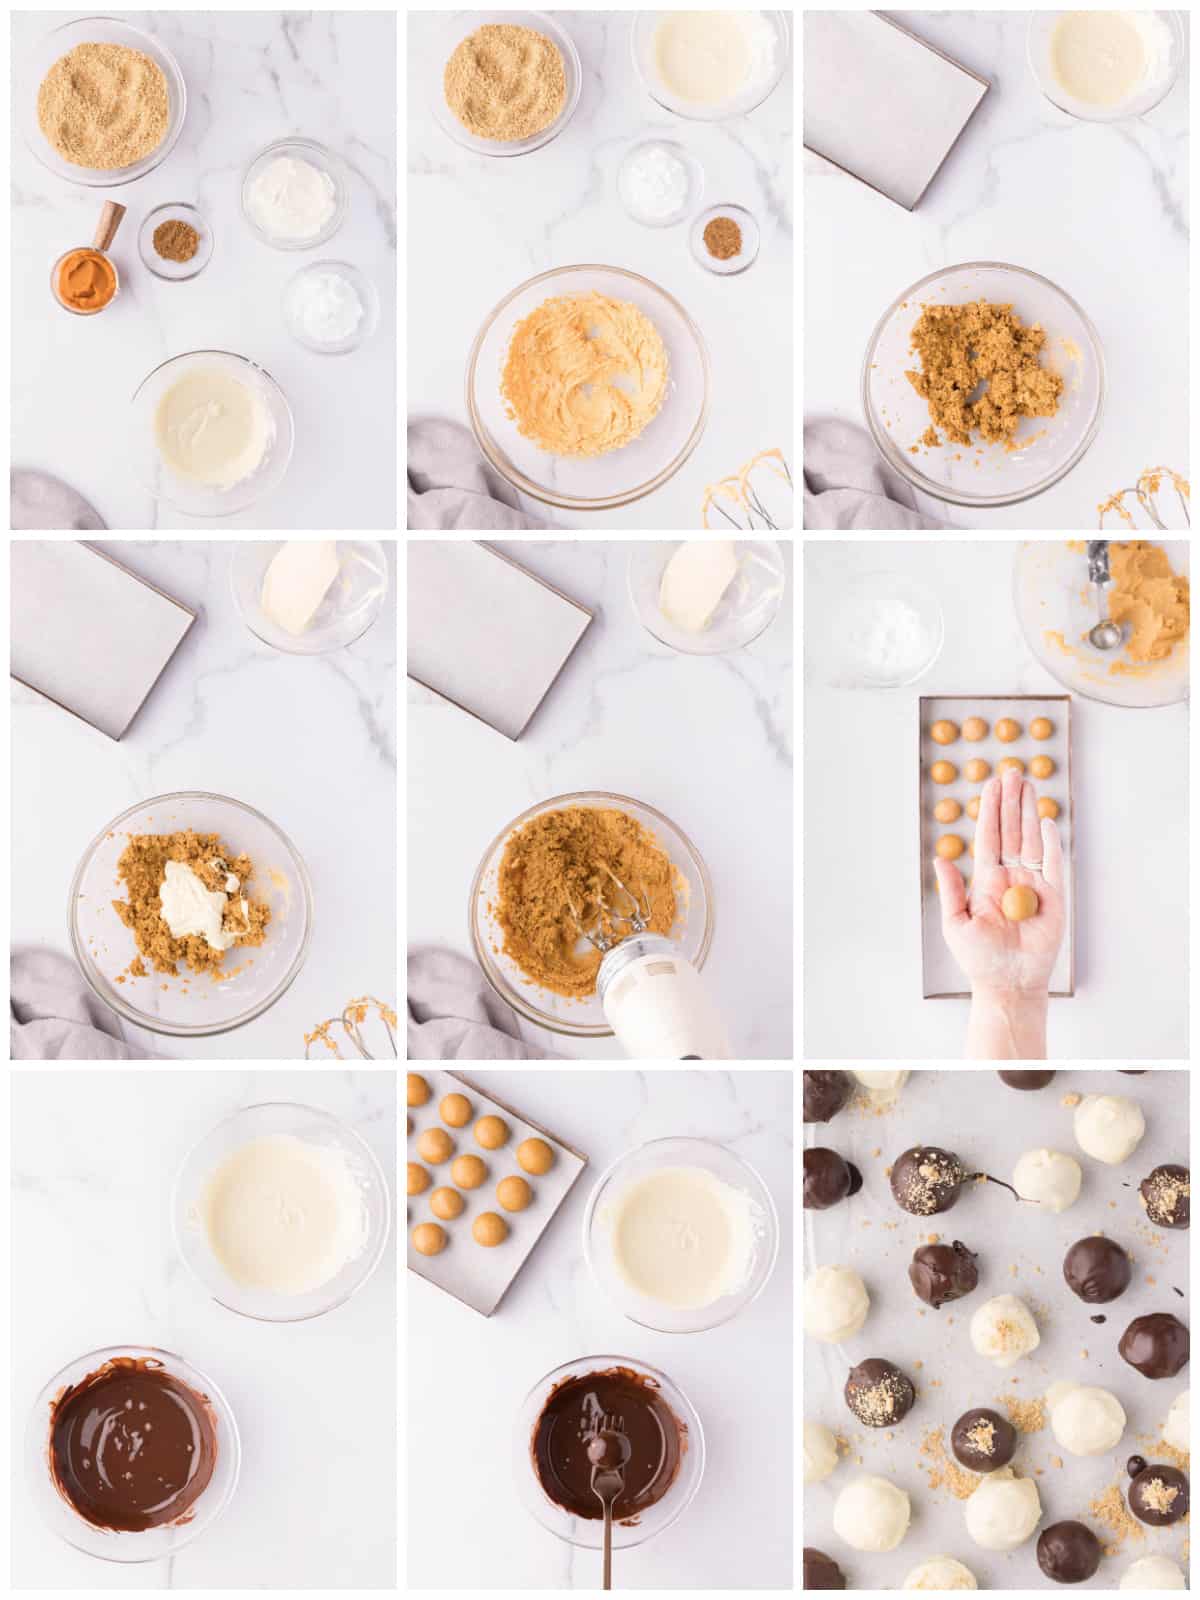 Step by step photos on how to make Pumpkin Truffles.